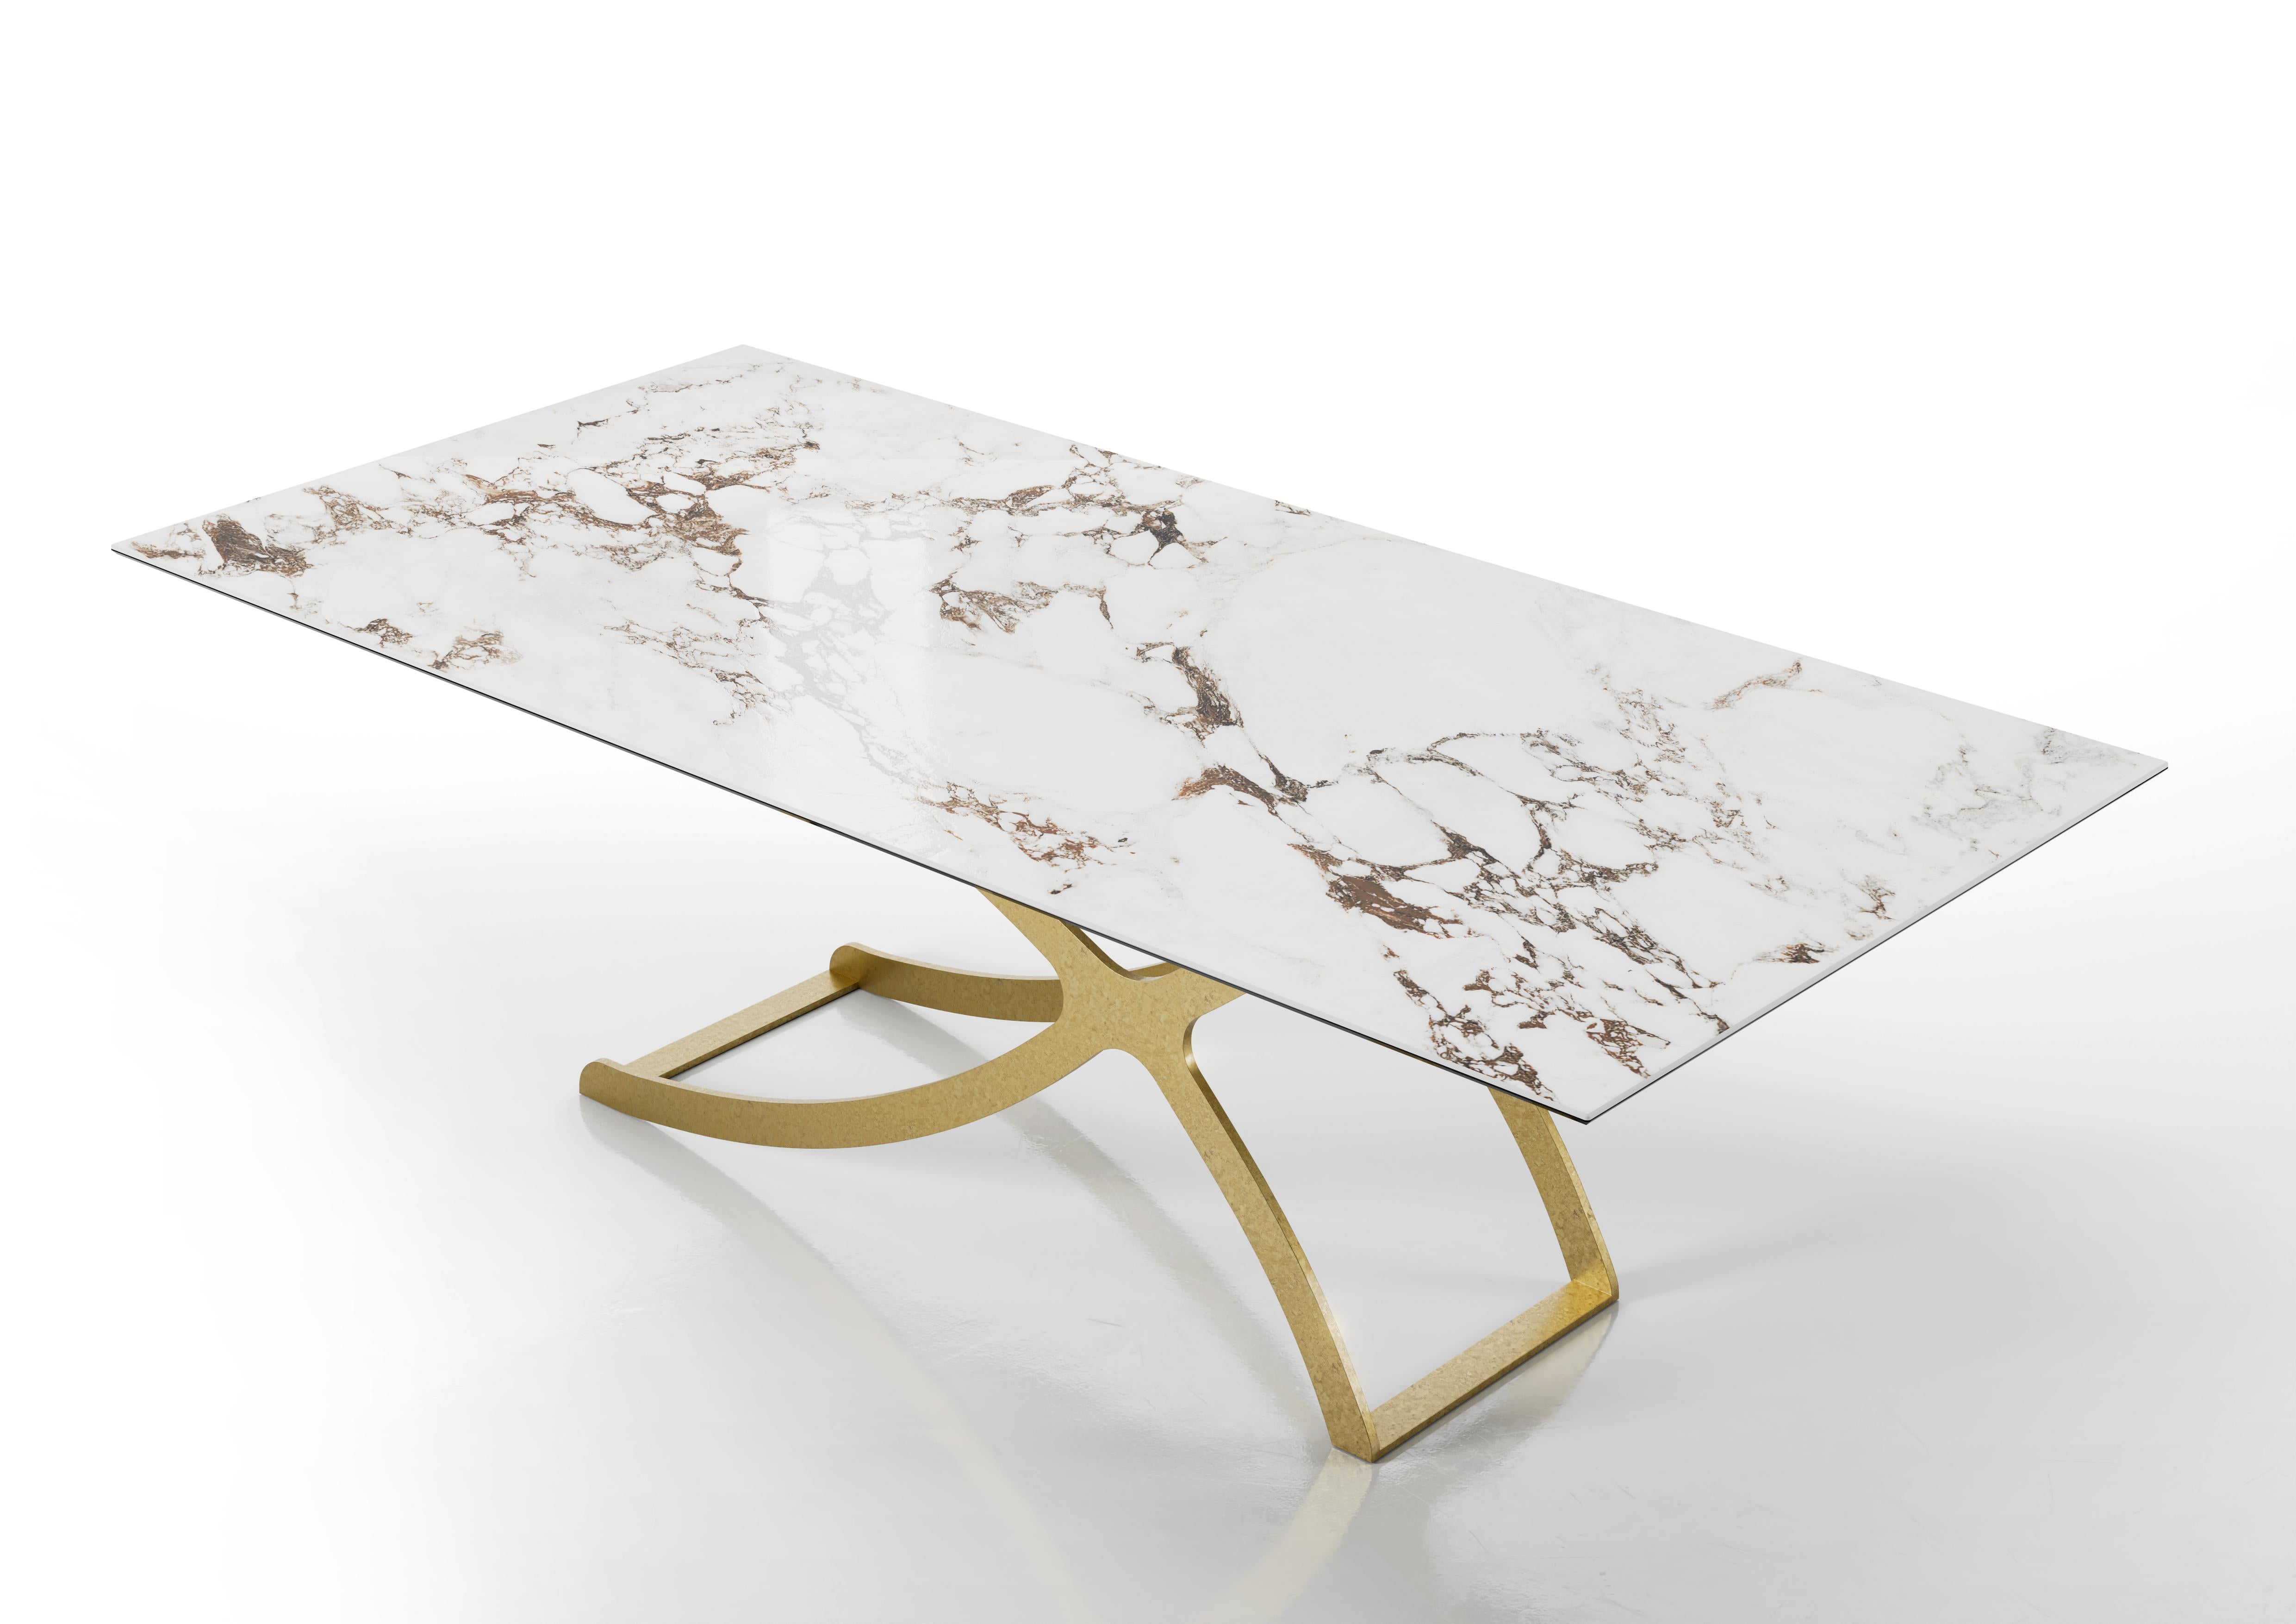 Apollo Dining Table by Chinellato Design
Dimensions: W 250 x D 120 x H 72 cm
Materials: 
Top: Glossy Capraia ceramic top with an extra clear smooth tempered glass under-top.
Base: Chabin gold-finished.


The base, crafted from worked and welded